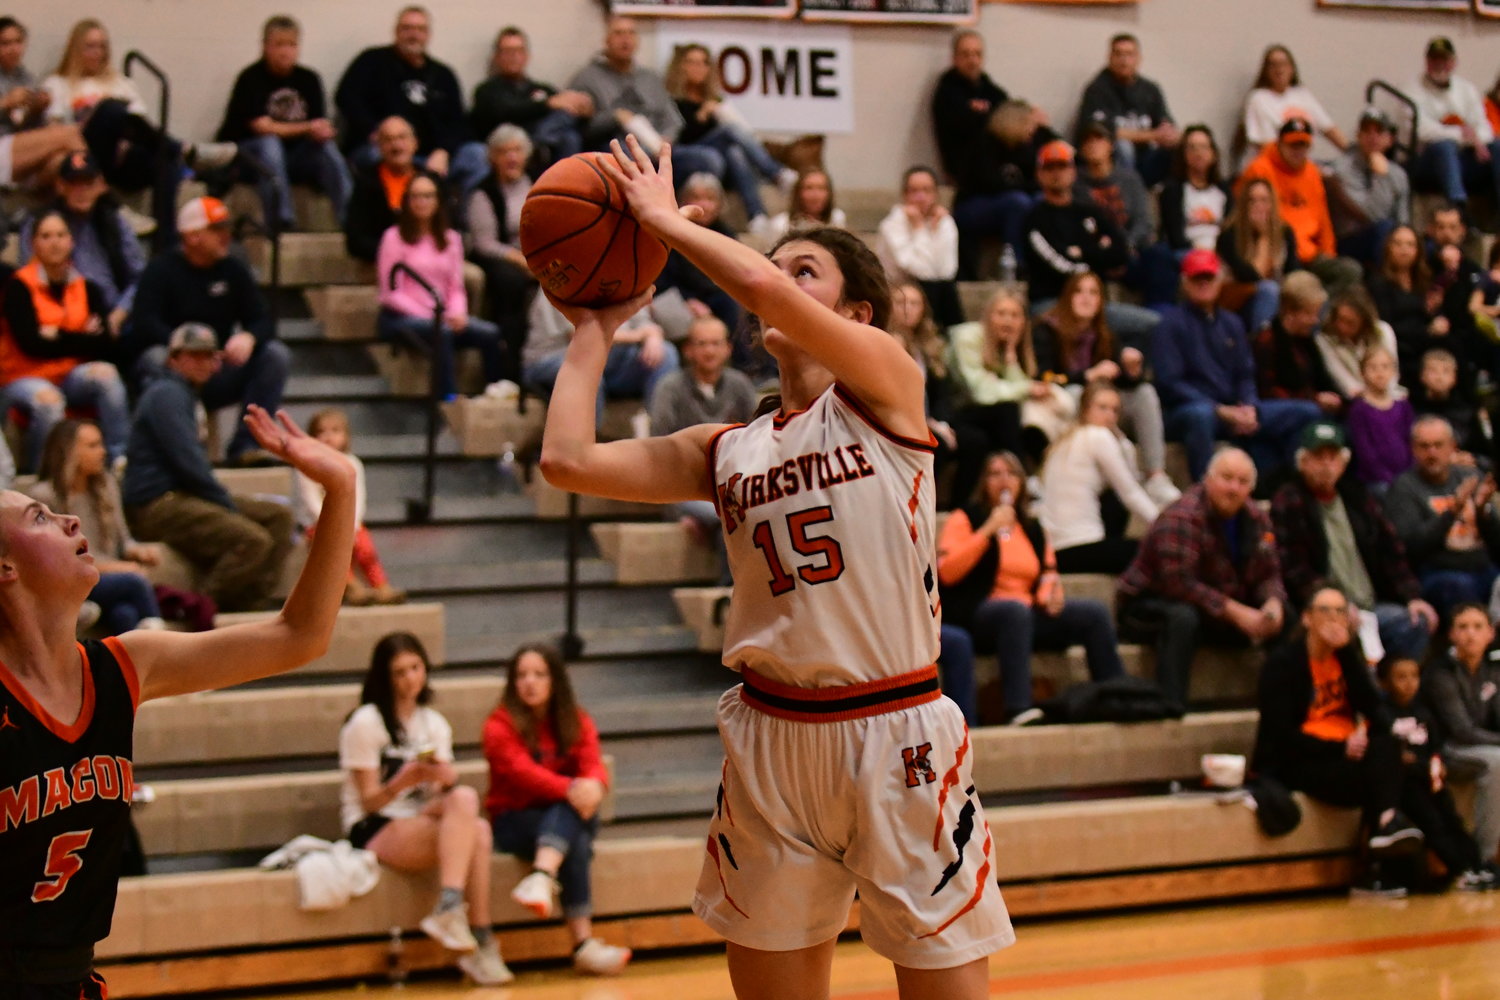 Action from Tuesday's girls basketball game between Kirksville and Macon.